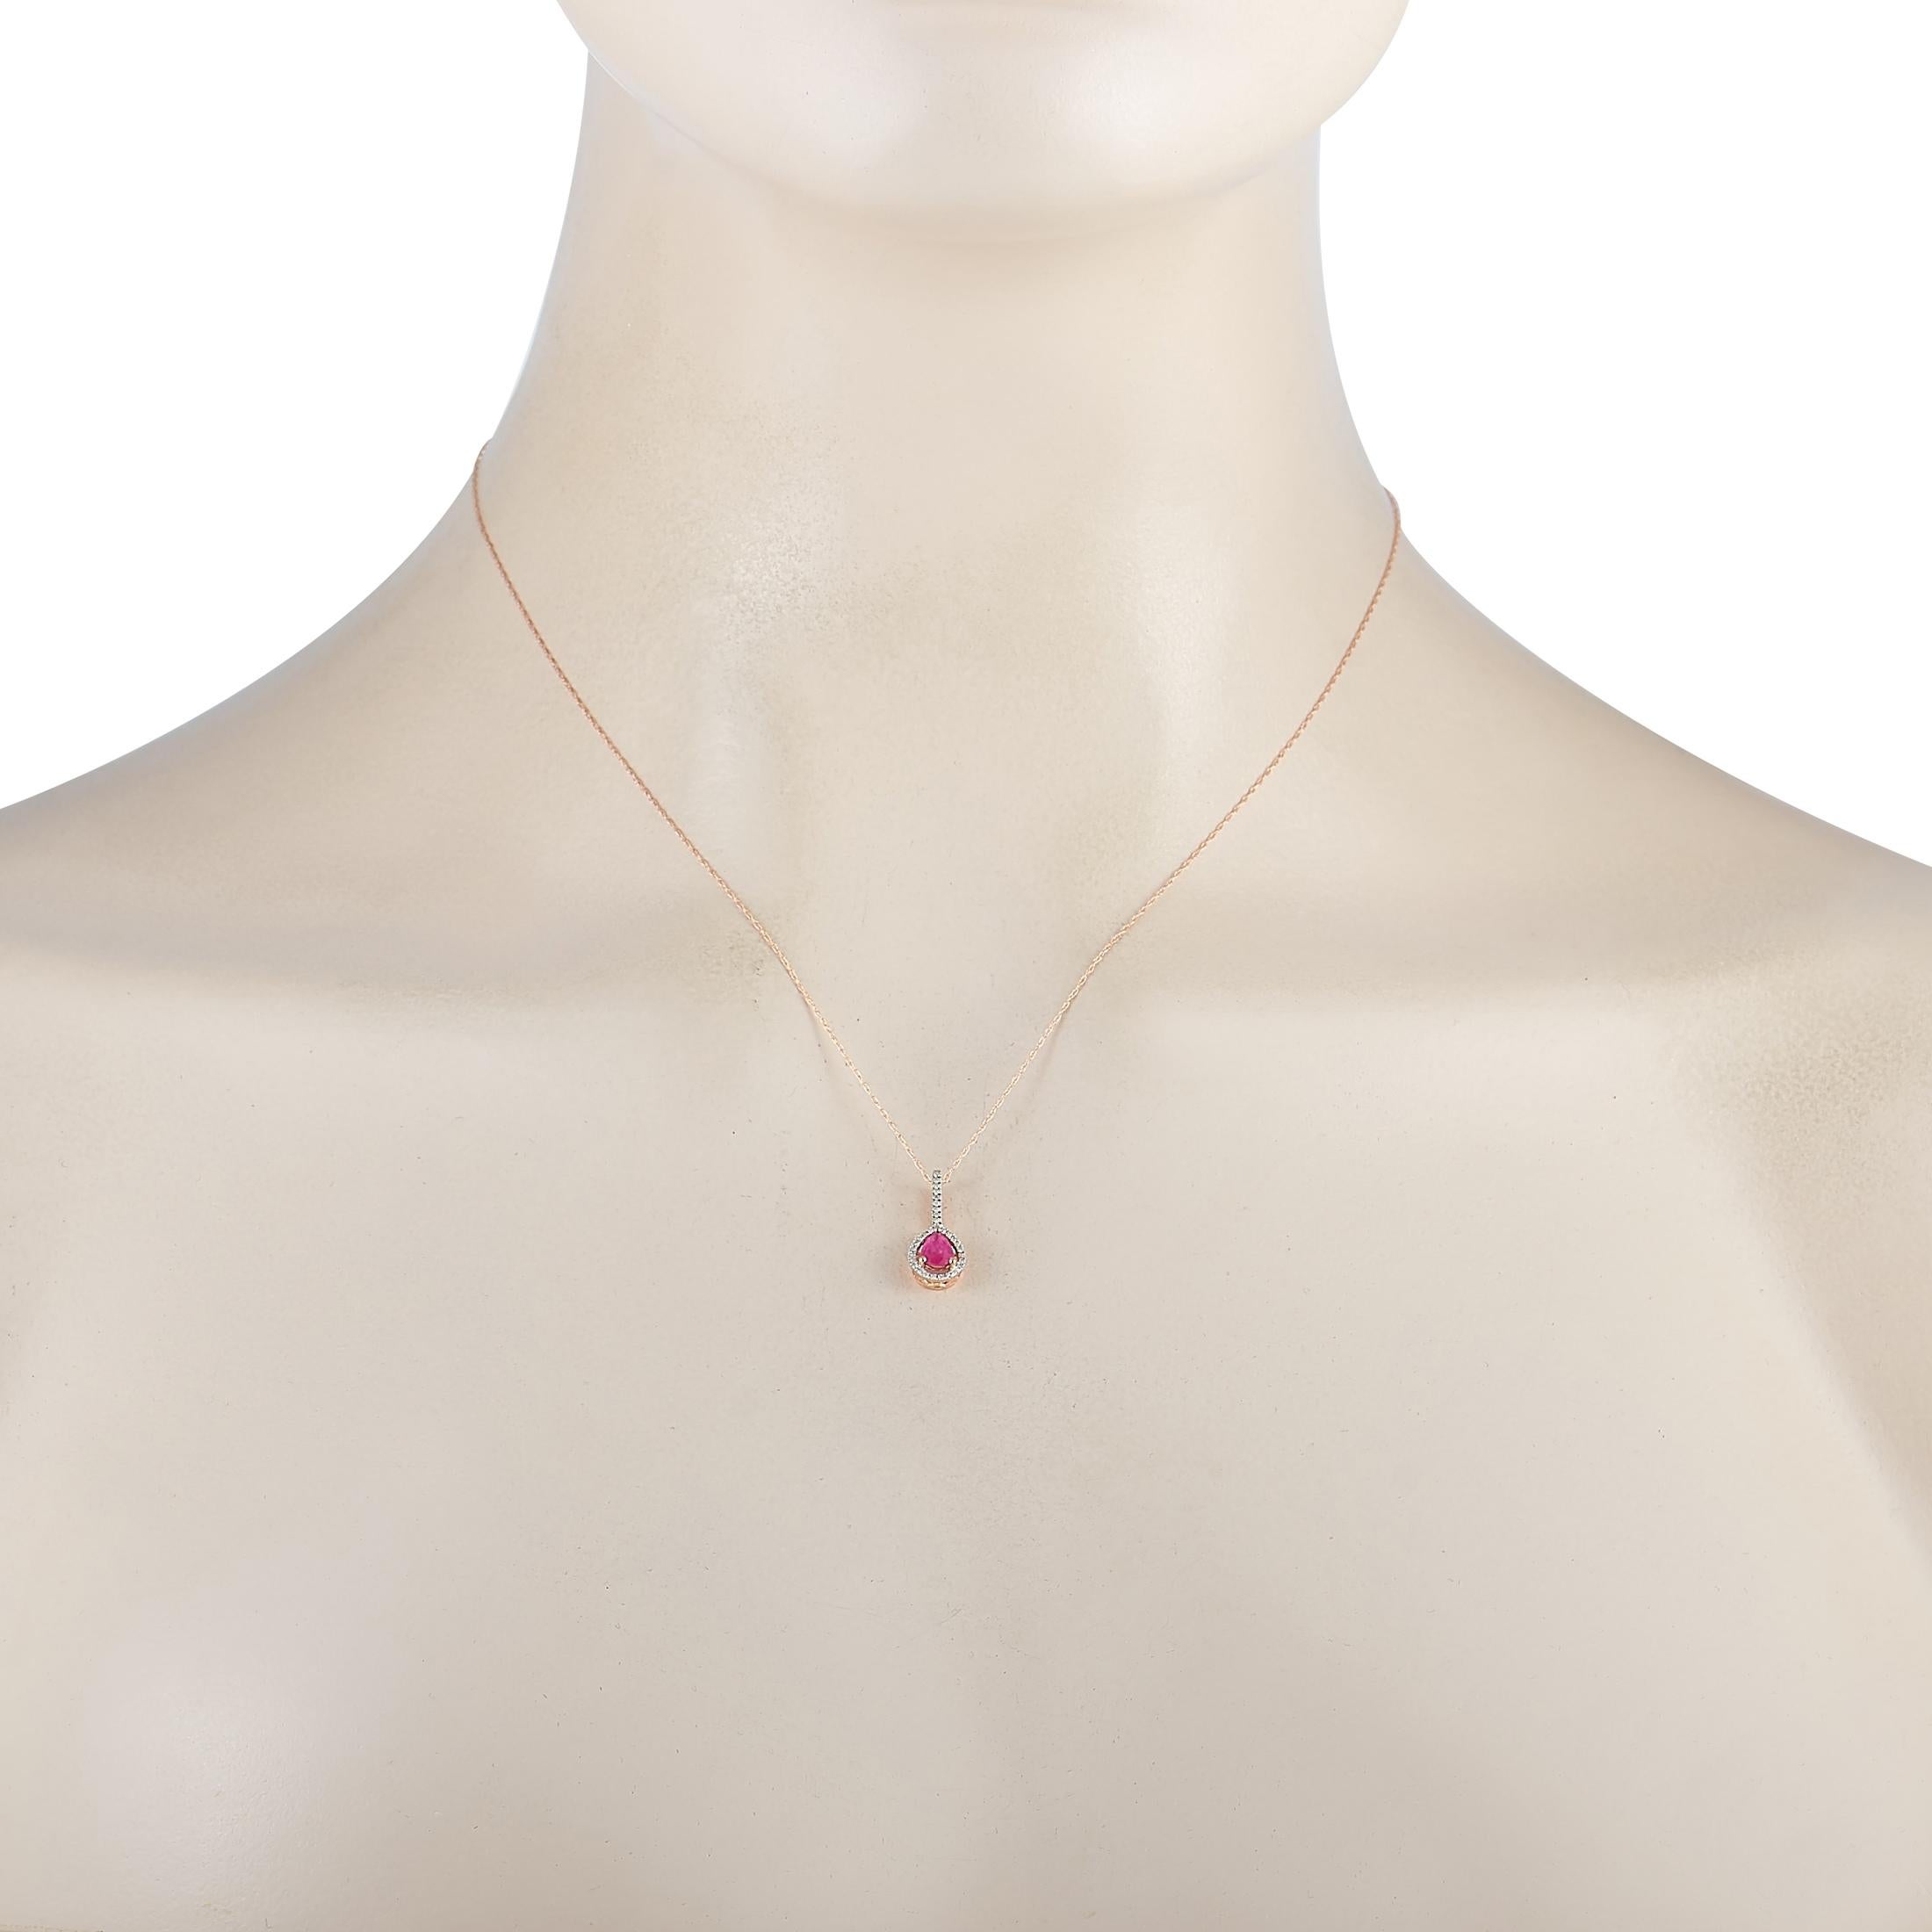 This LB Exclusive necklace is made of 14K rose gold and embellished with a 0.50 ct ruby and a total of 0.09 carats of diamonds. The necklace weighs 1.3 grams and is presented with a 17” chain and a pendant that measures 0.70” in length and 0.25” in